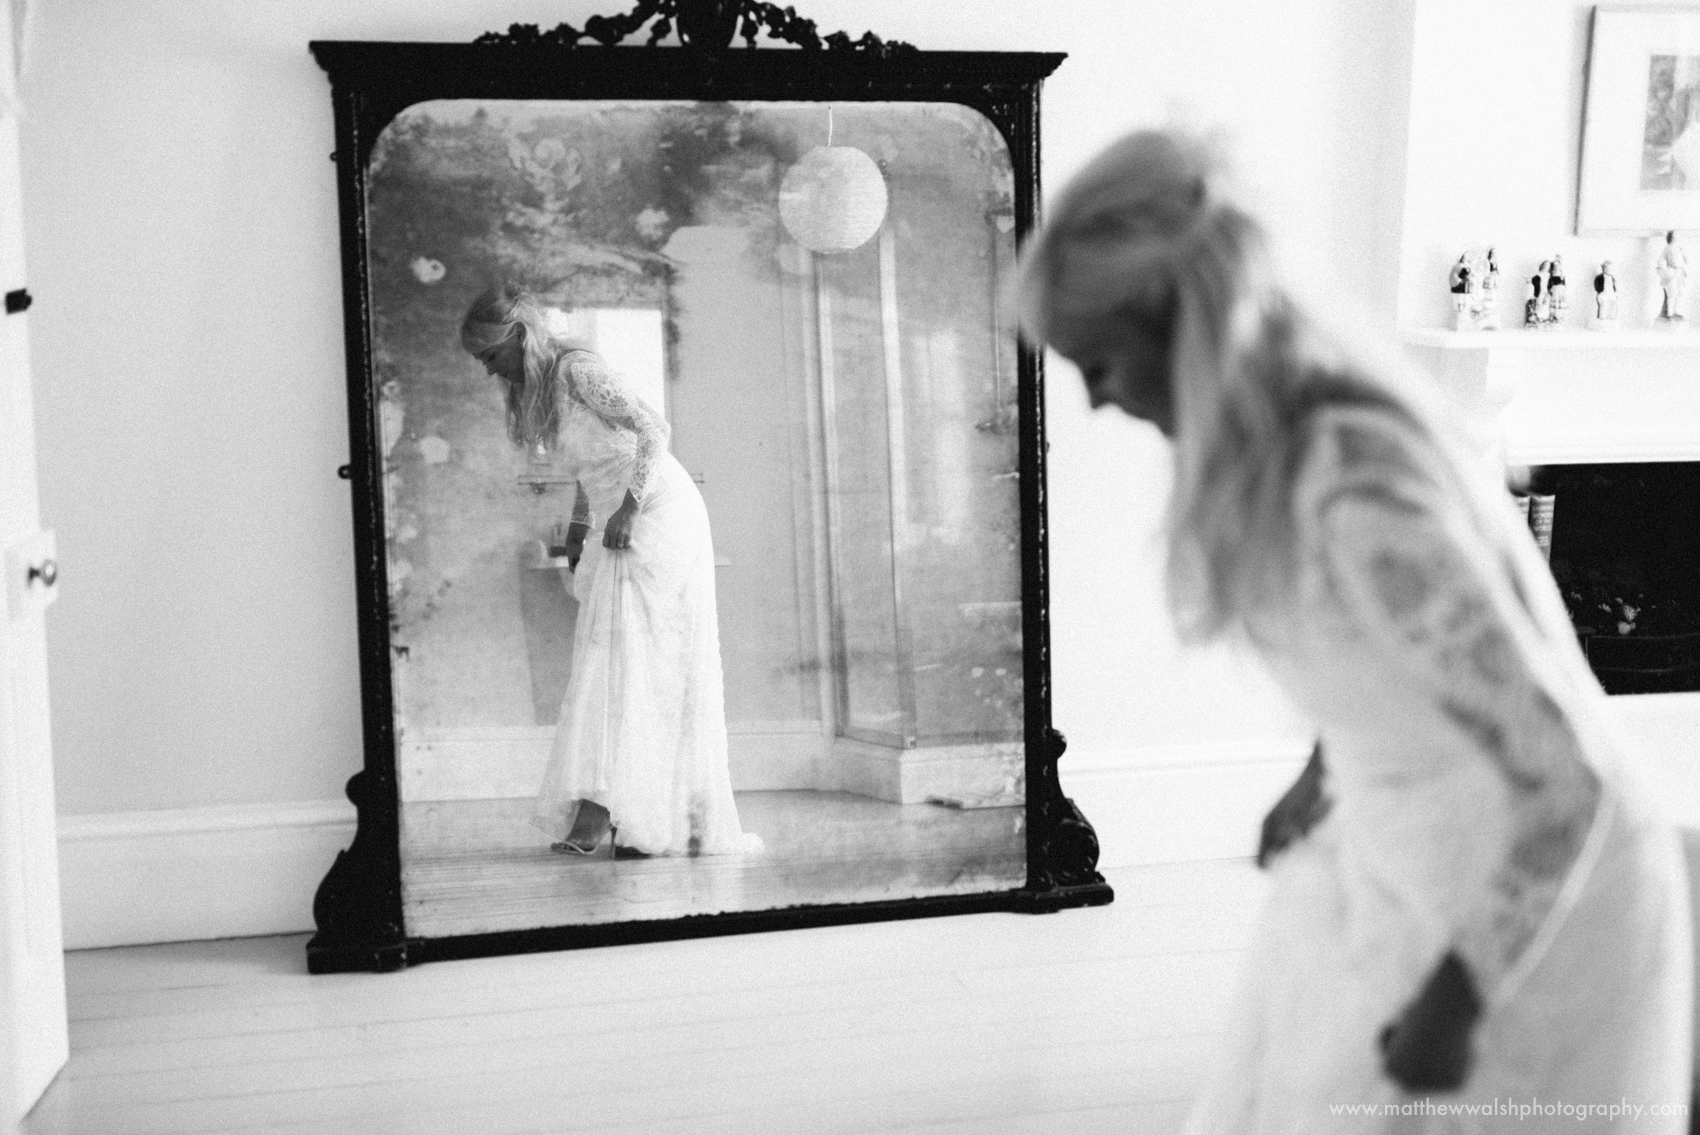 The bride checks her dress in the mirror in the bridal suite at Lyde Court wedding venue